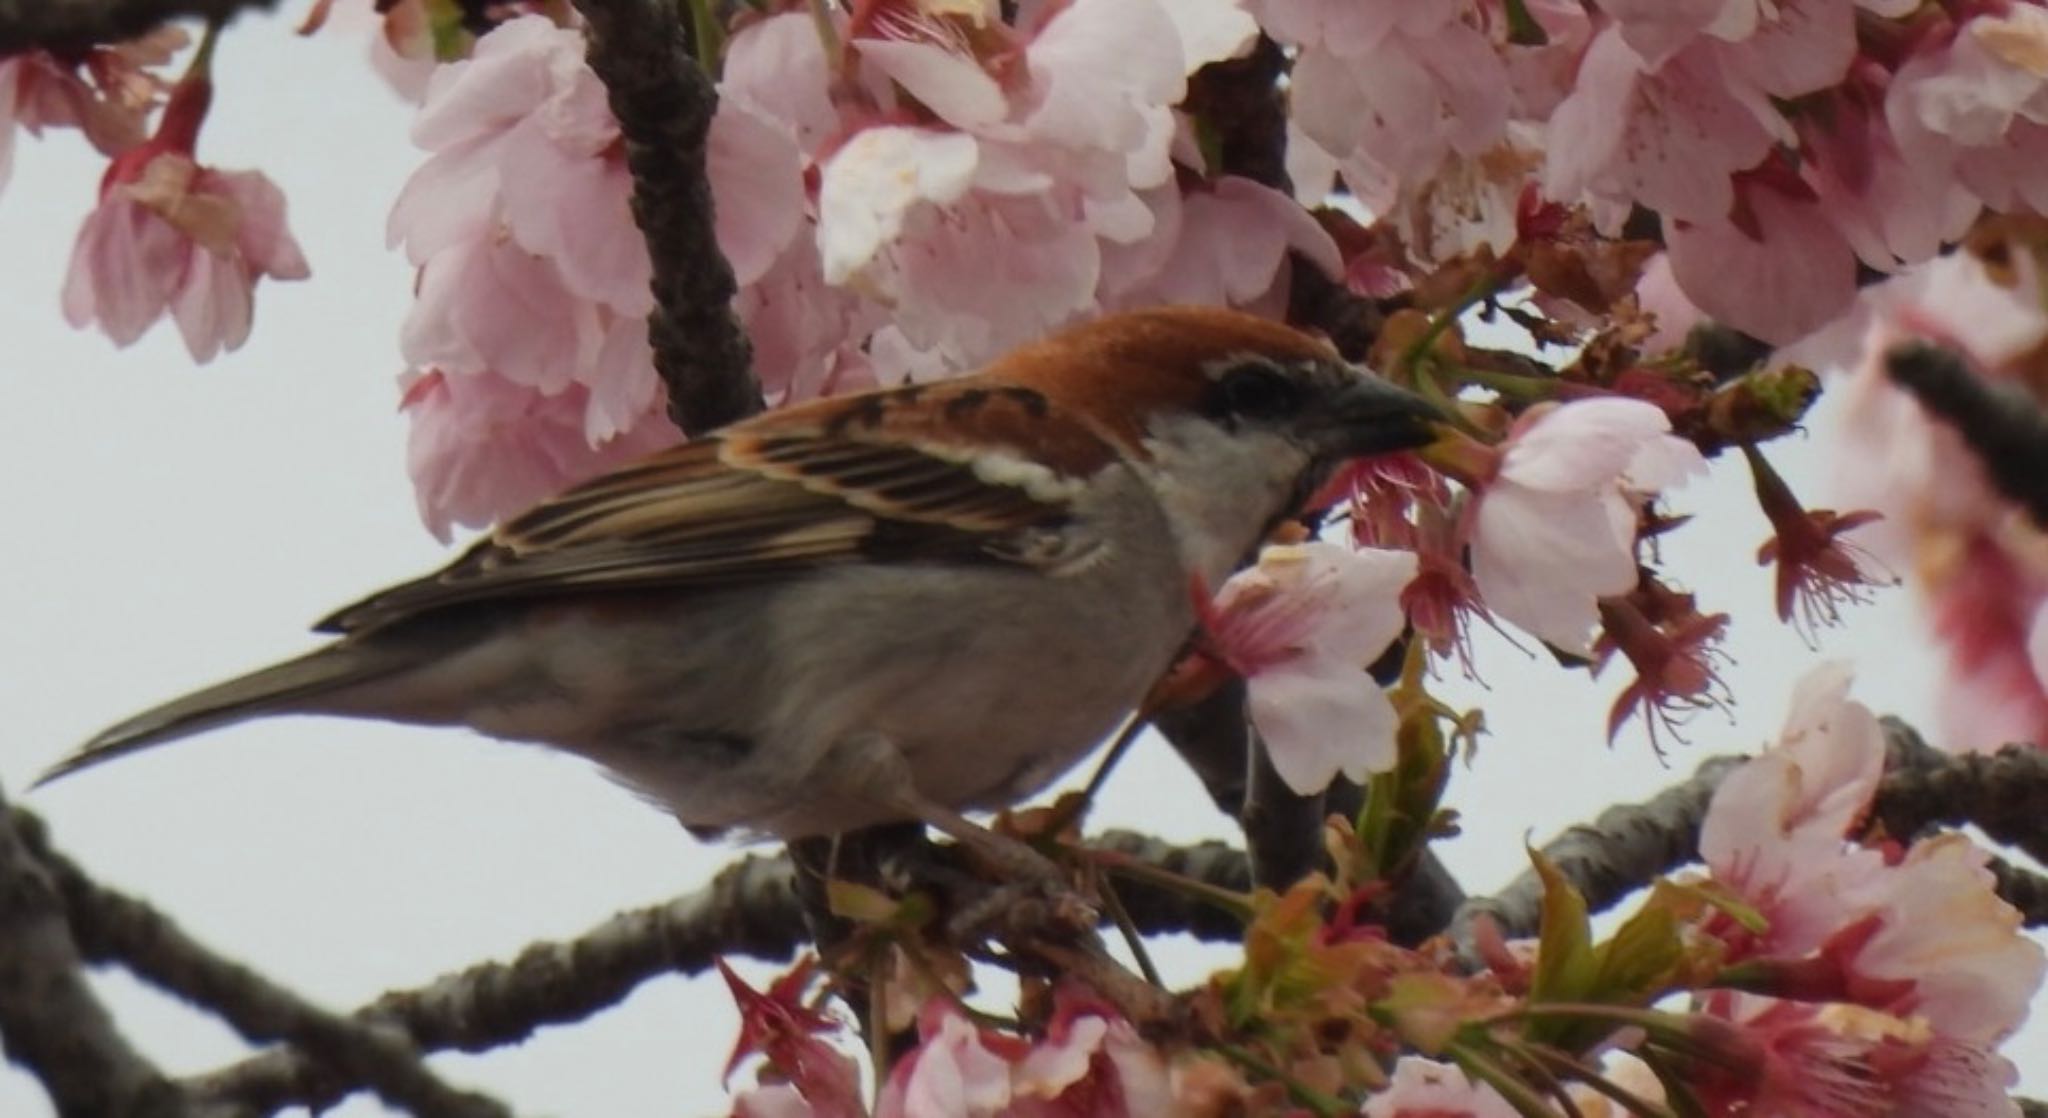 Photo of Russet Sparrow at 鴻巣市 by 日本野鳥撮影の旅